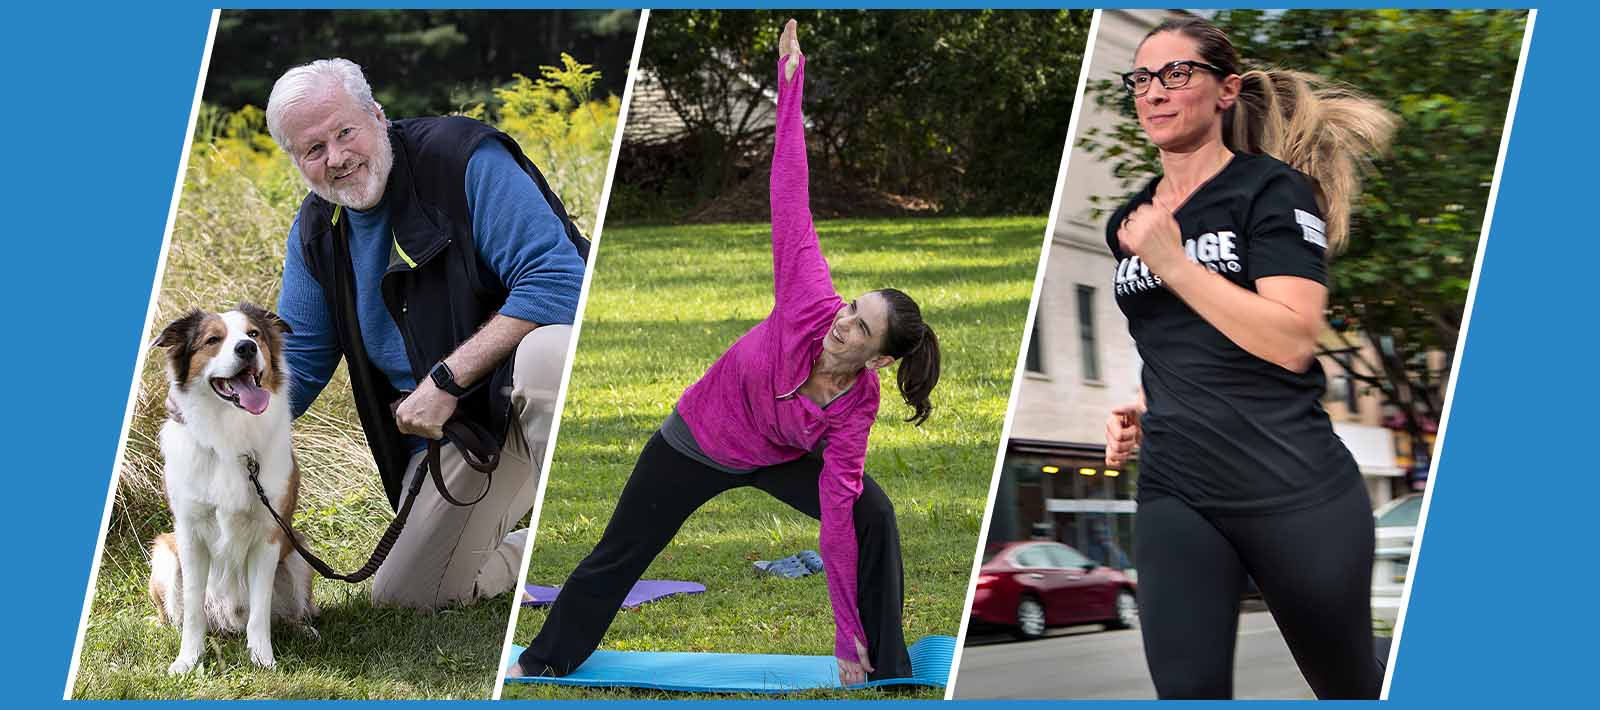 These individuals are able to enjoy activities they love, such as walking, yoga, and running.